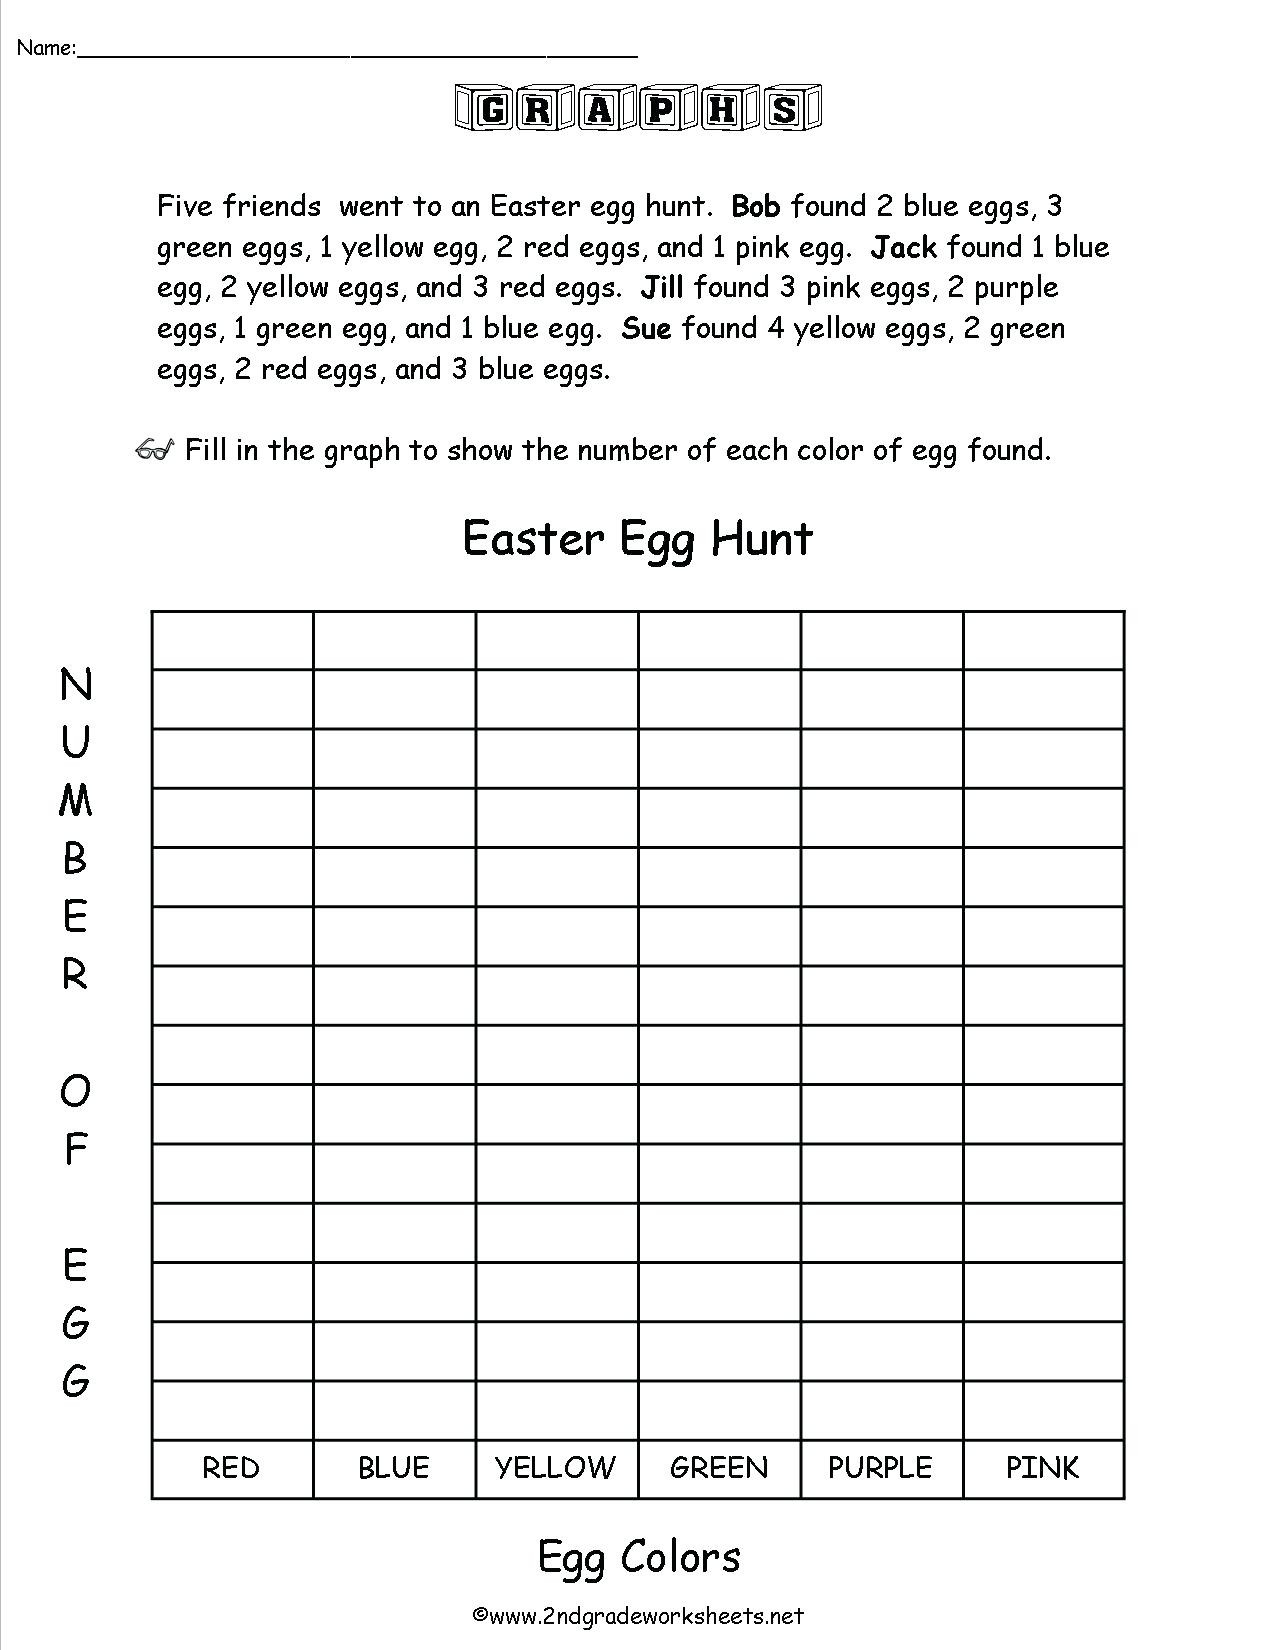 Free Math Worksheets Third Grade 3 Addition 3 Add 4 3 Digit Numbers In Columns